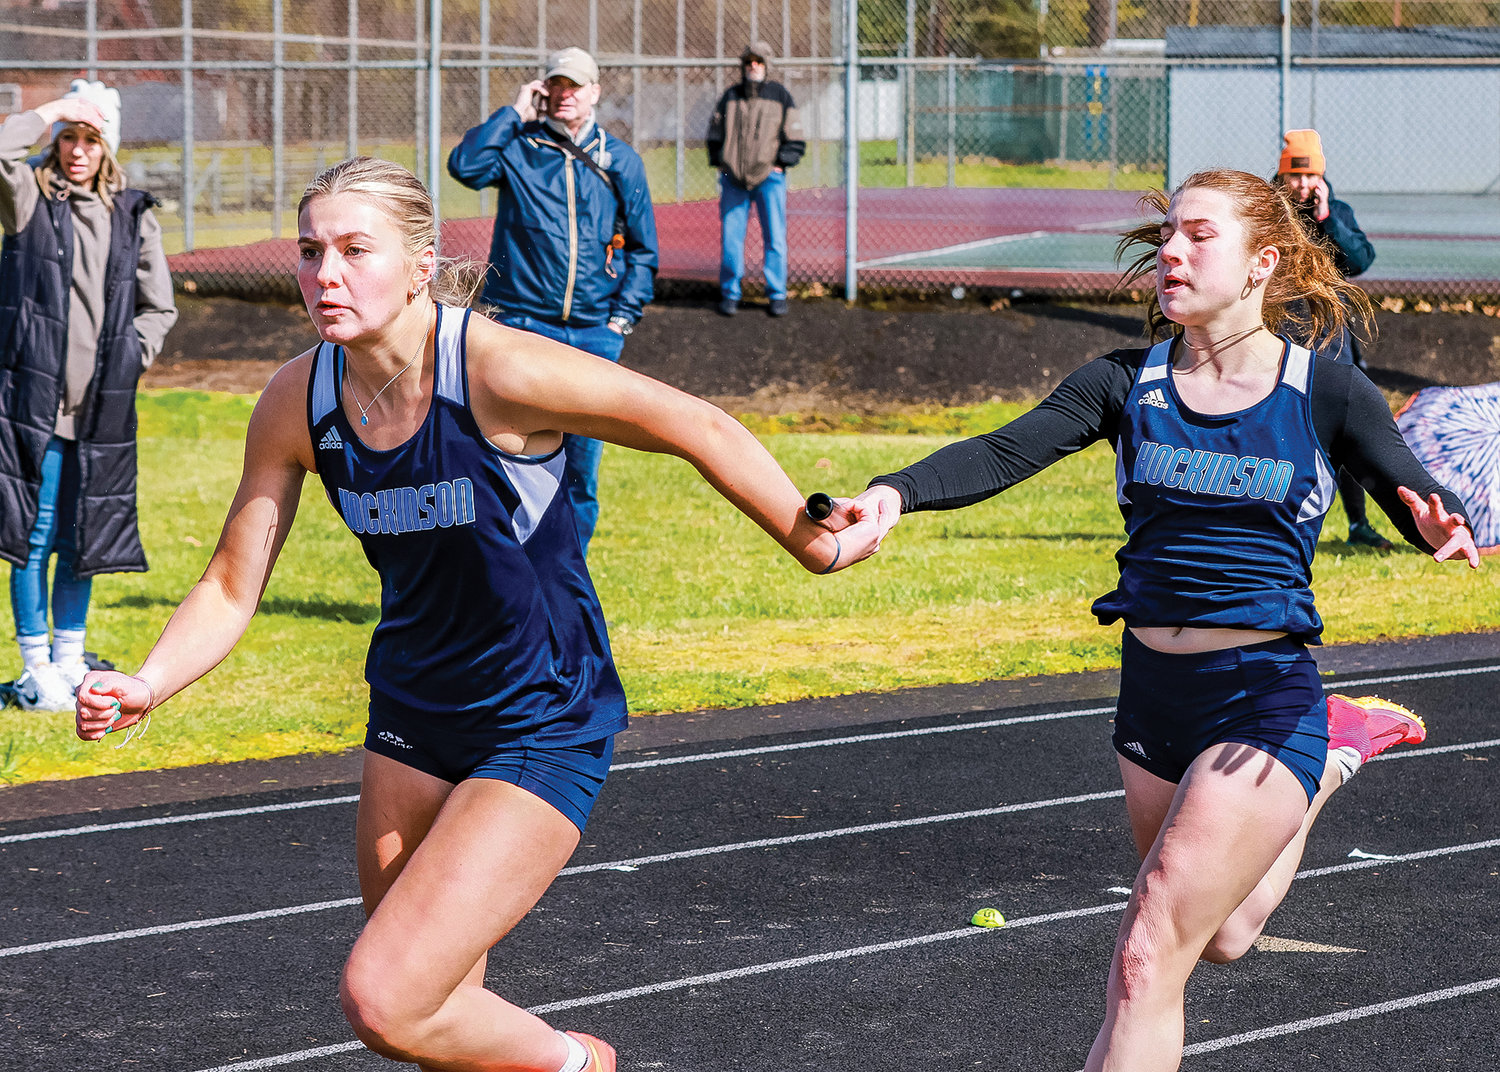 Hockinson's Amelia Stewart hands the baton off to Anna Nadal during the 4x100 meter relay at the Tiger Invite at Battle Ground High School on Saturday, March 25.